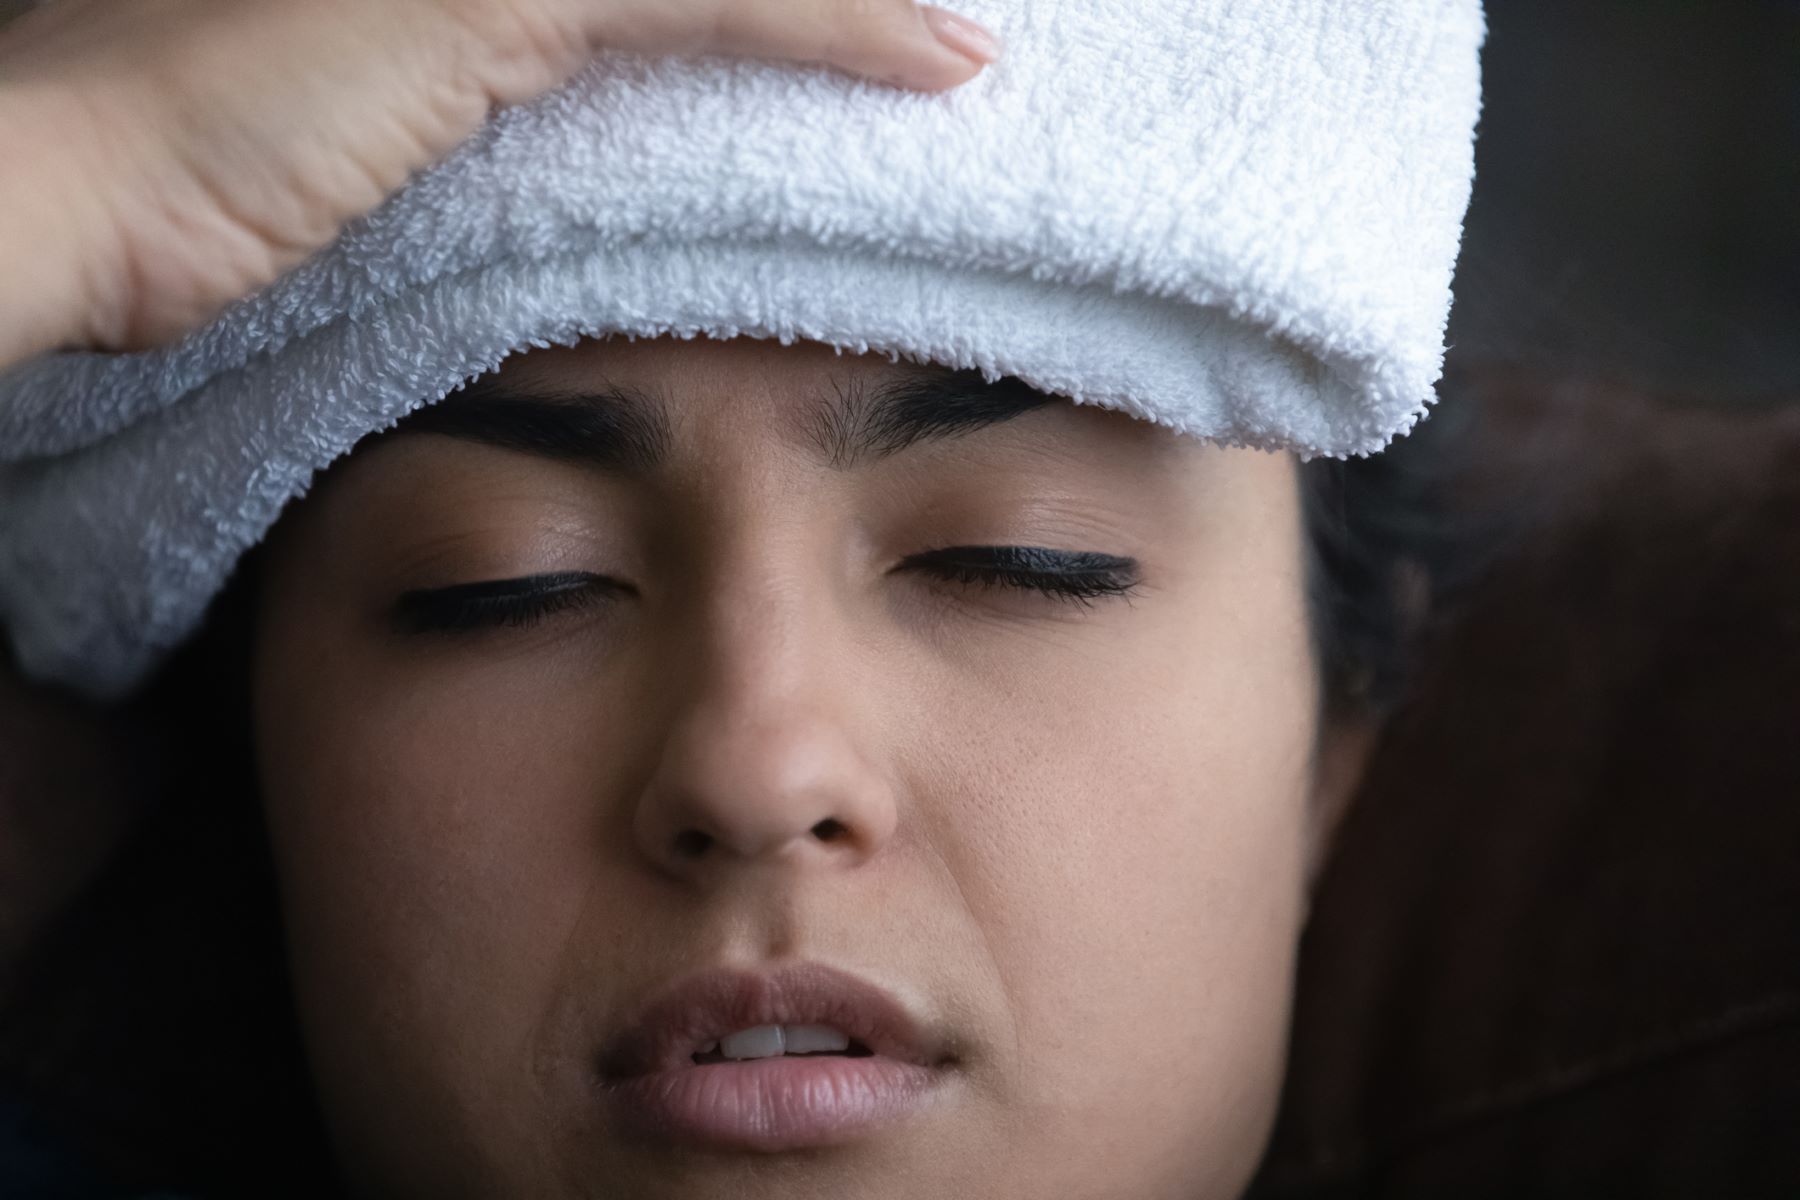 Woman treating scalp tenderness at home